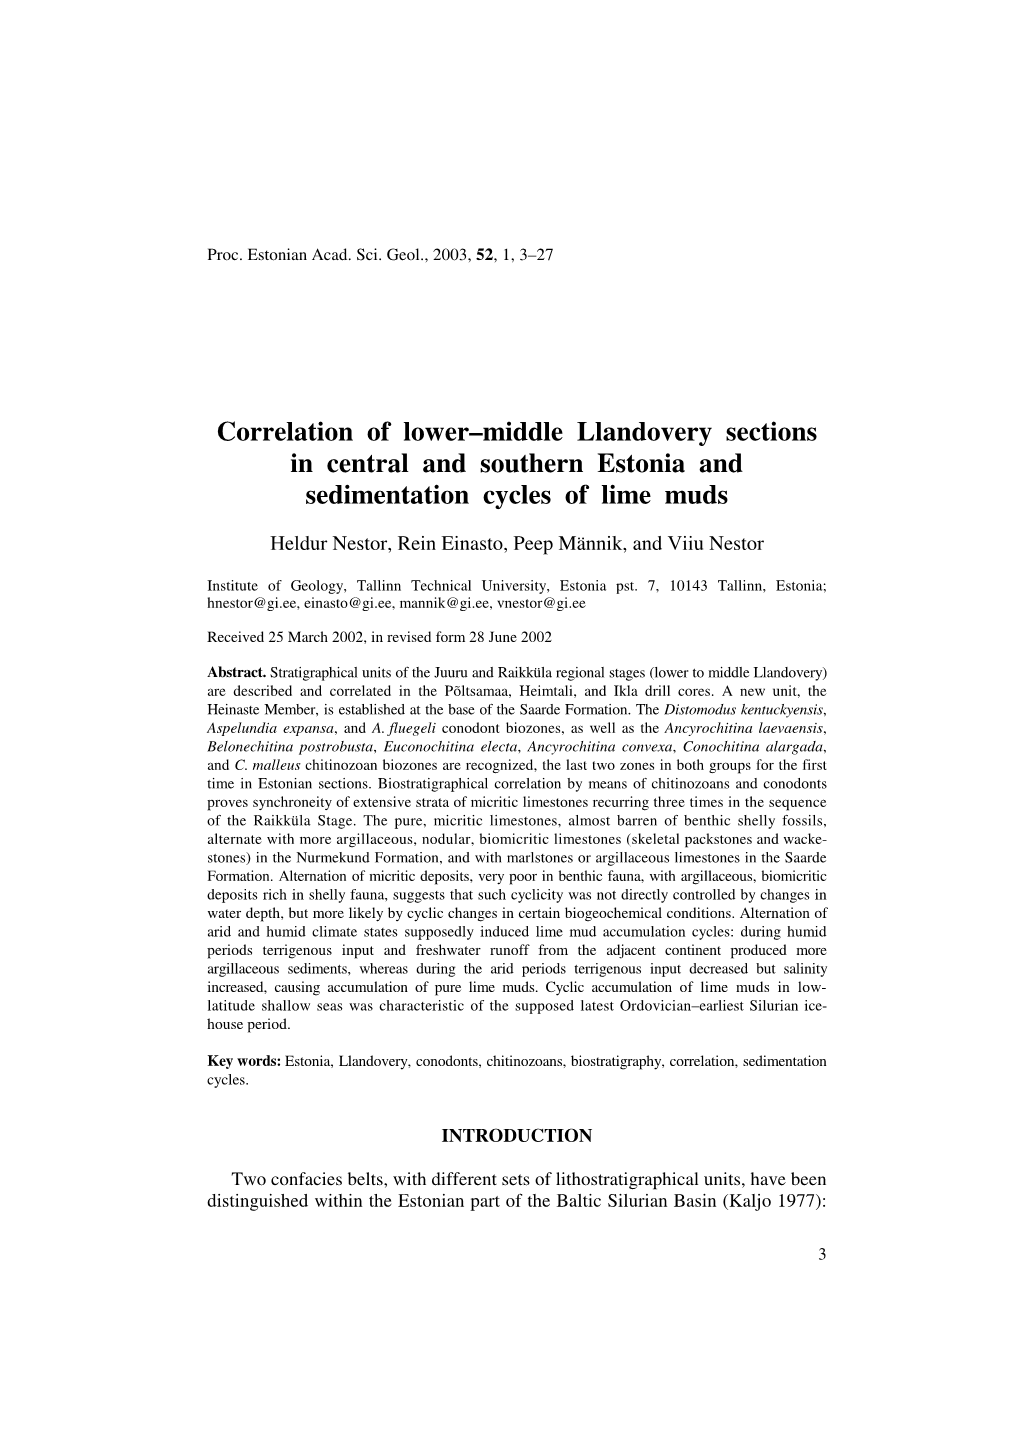 Correlation of Lower–Middle Llandovery Sections in Central and Southern Estonia and Sedimentation Cycles of Lime Muds